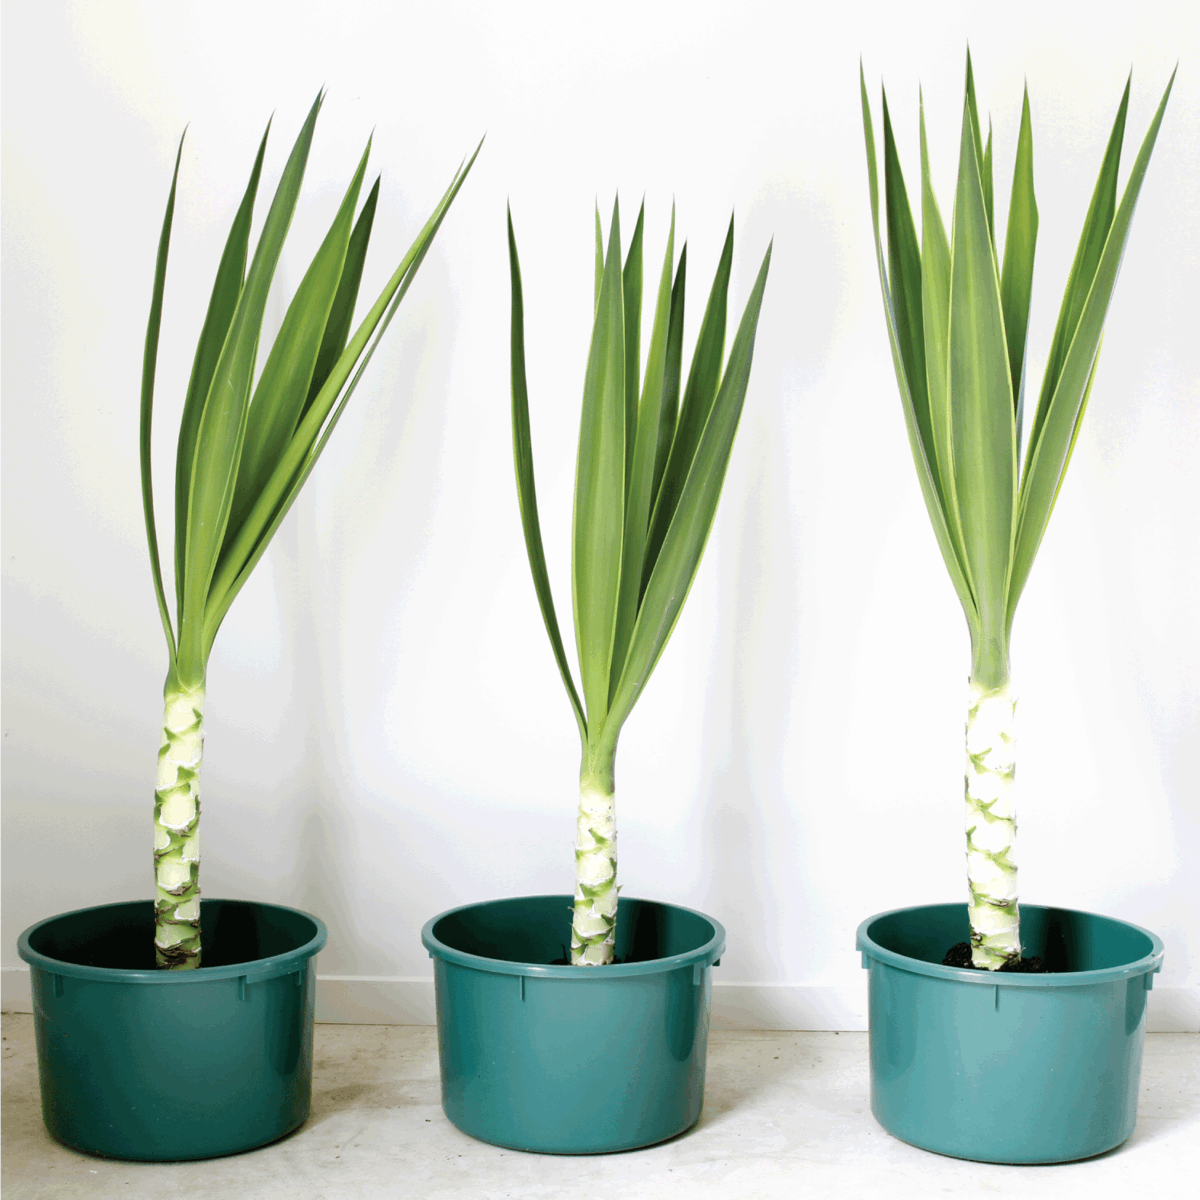 yucca plants placed in plastic pots